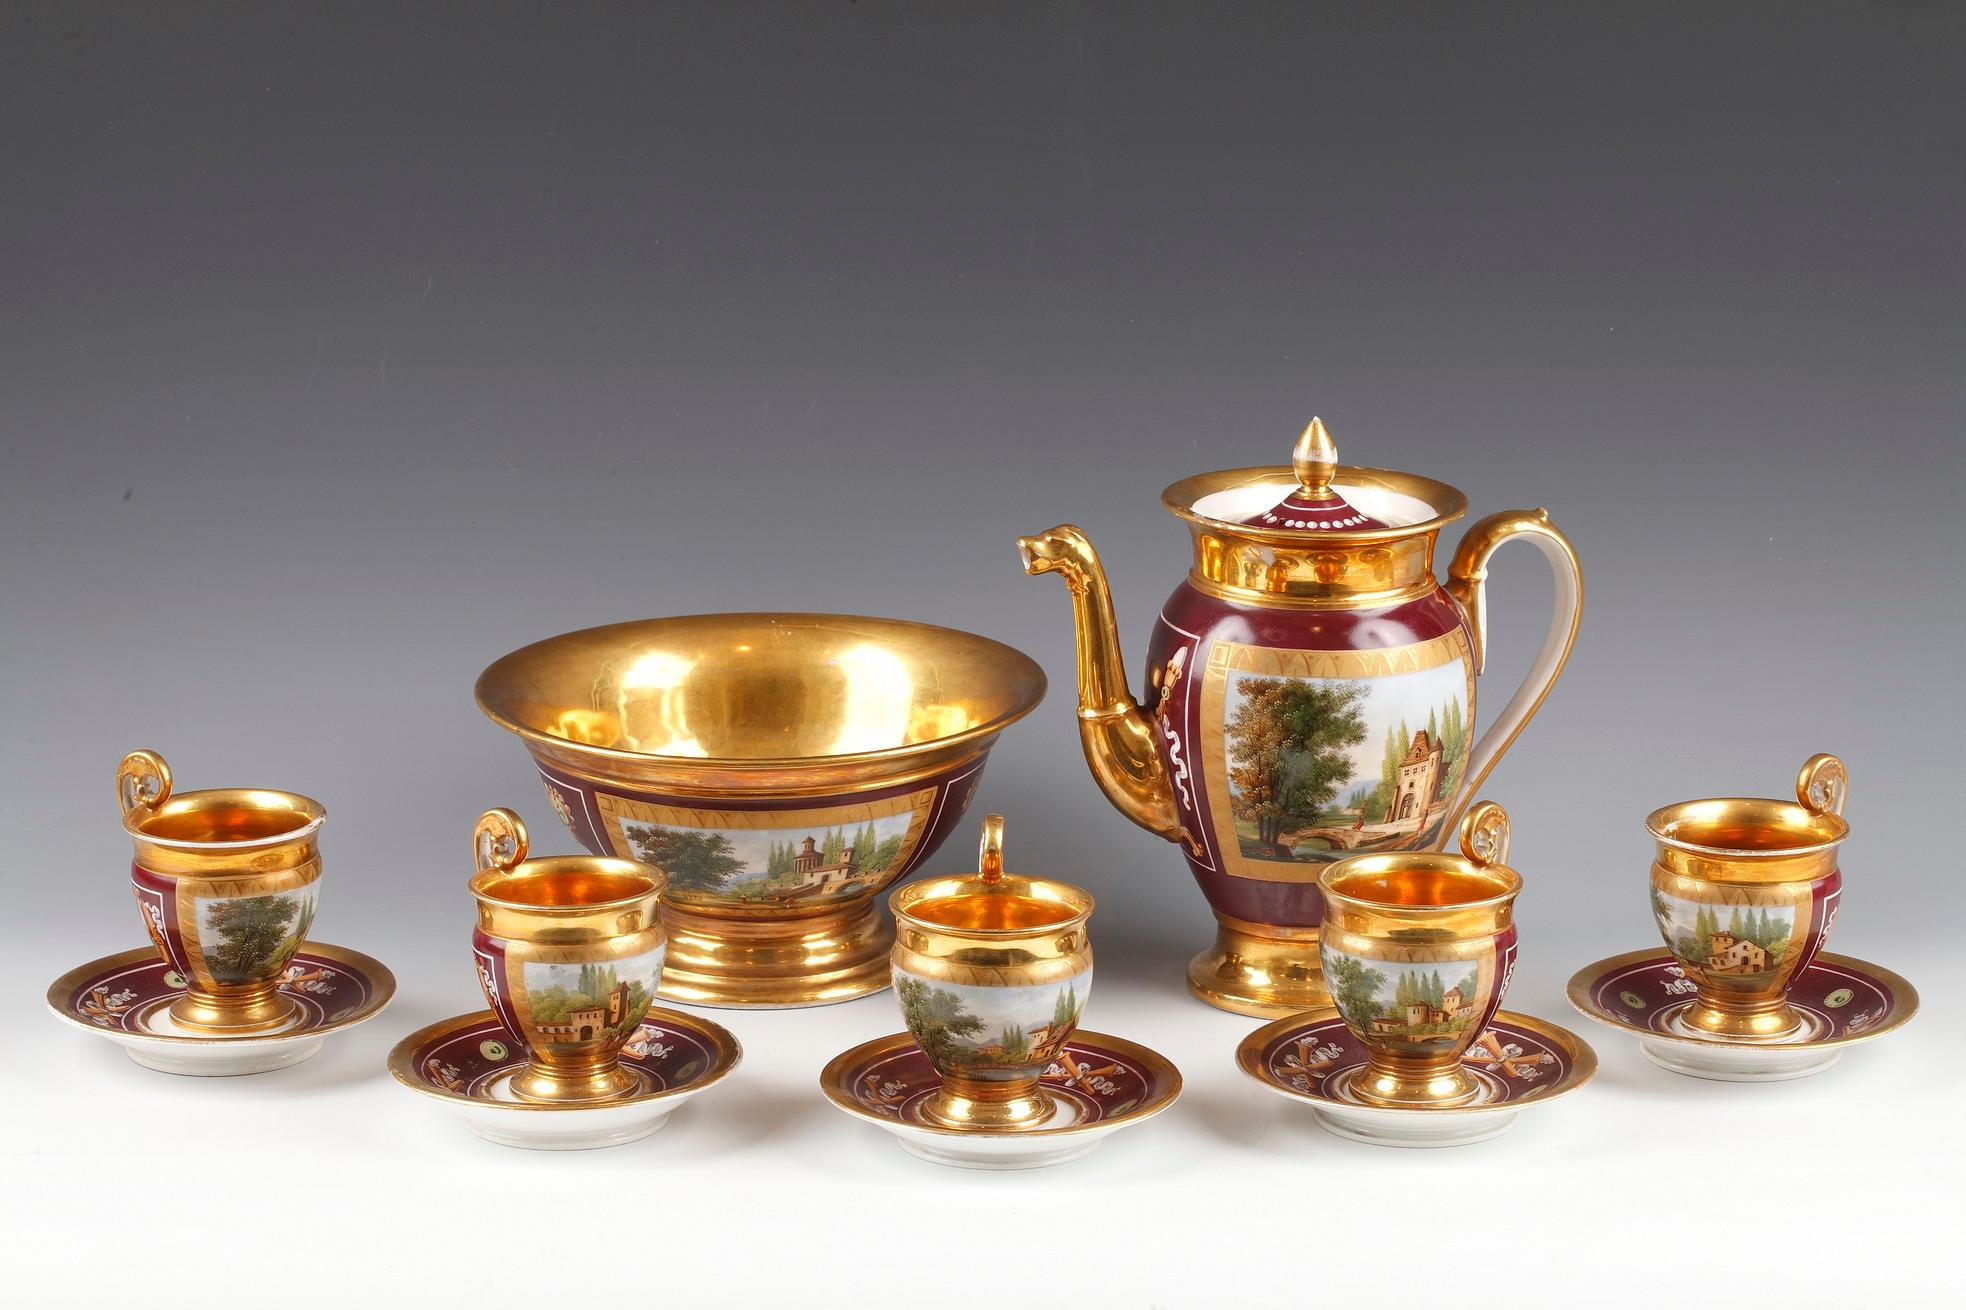 Charming Restauration style Paris porcelain tea set with red and gold Amati background, composed of a teapot, five cups with winding handle and their saucer, and a bowl. This set, lined with gold inside, is decorated with medallions representing